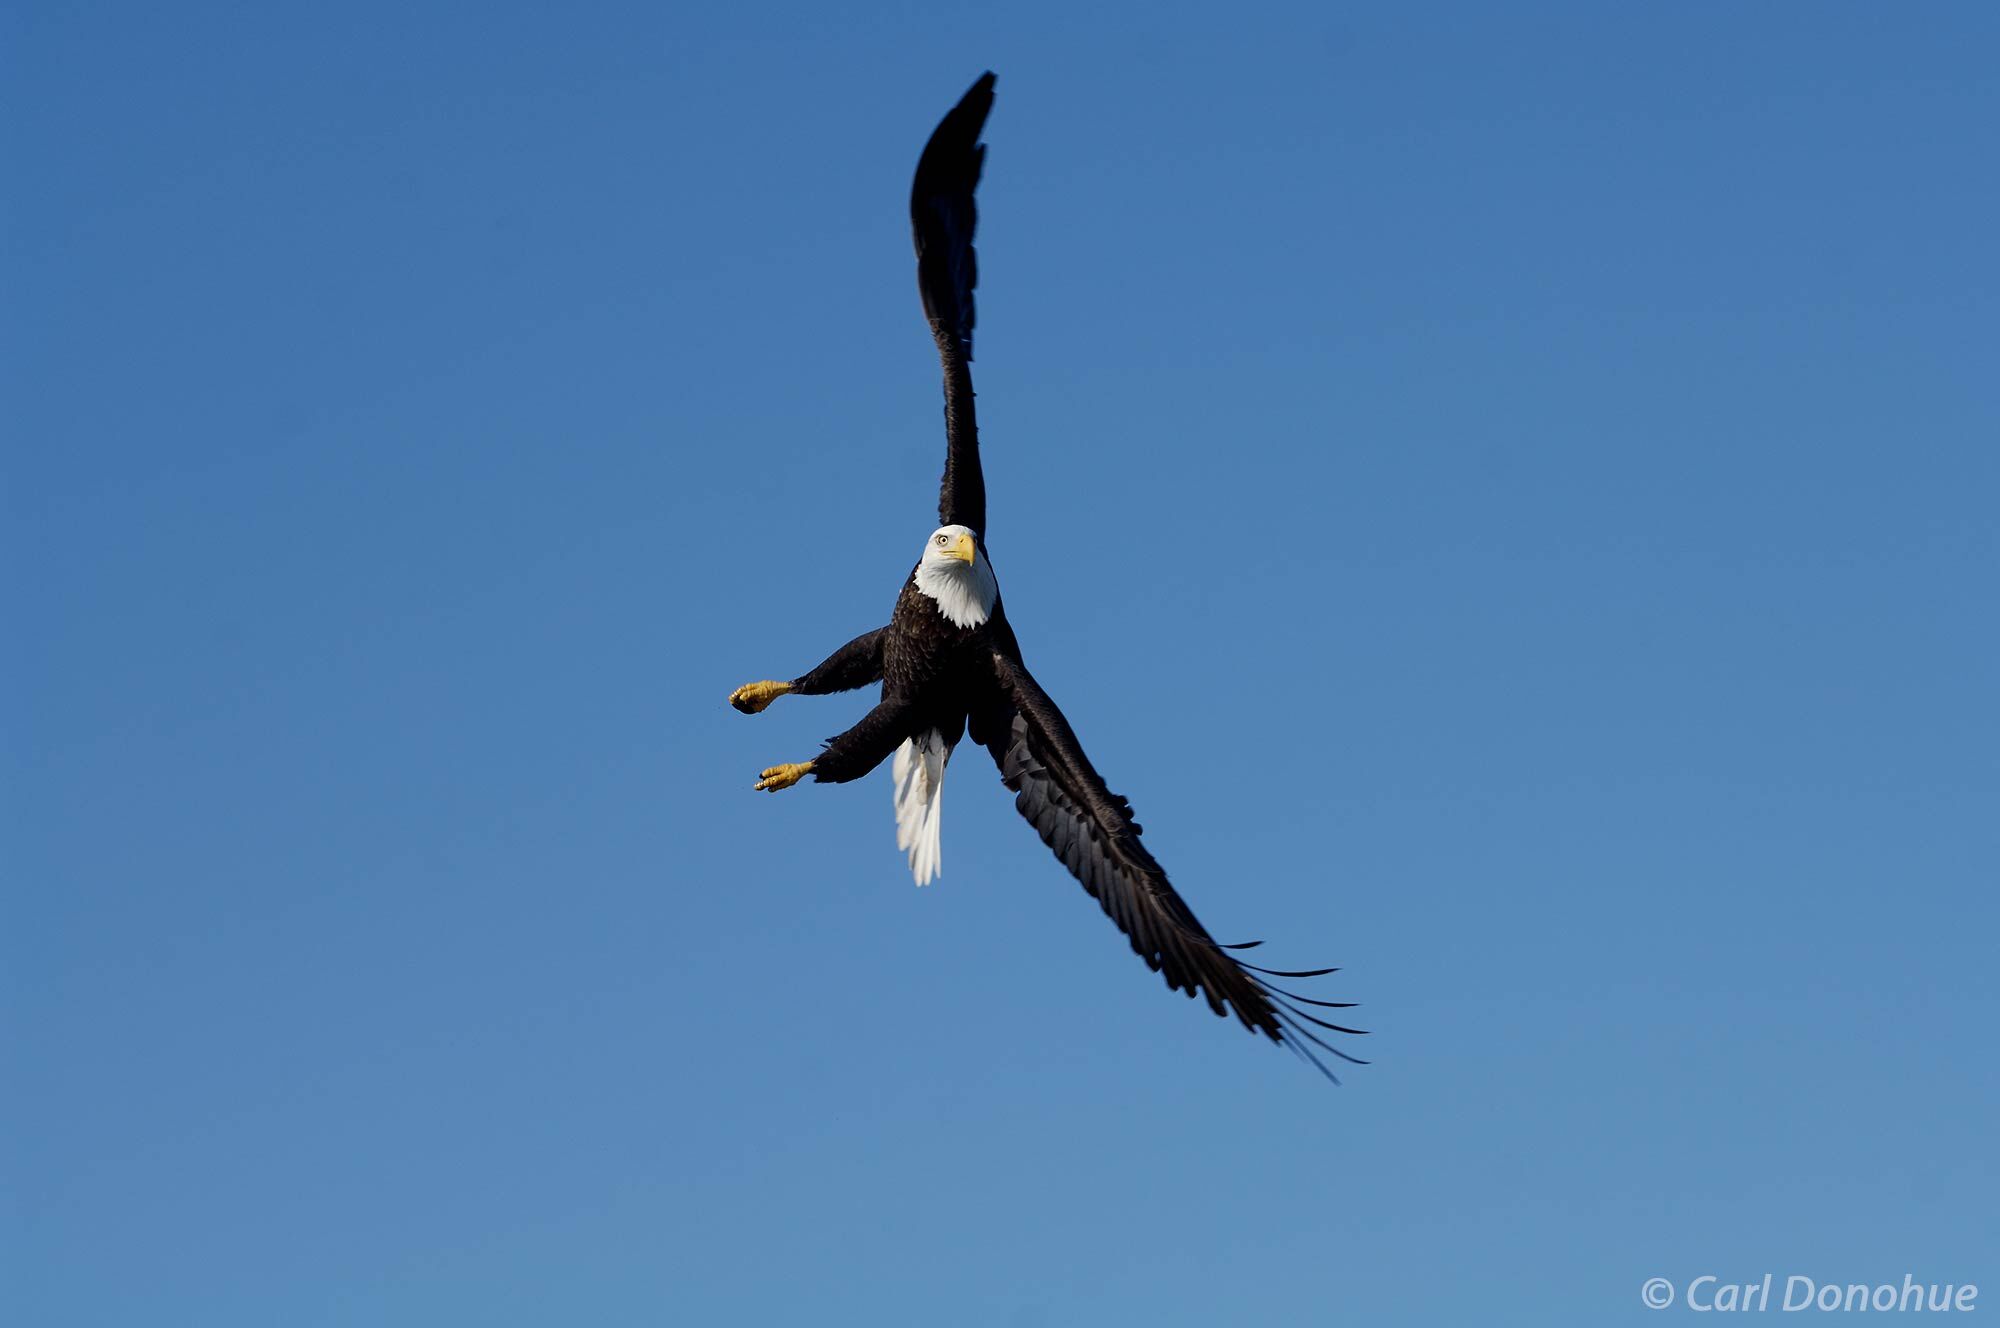 The bald eagle's keen eyesight allows it to spot a glint of silver in the water below, and it swiftly dives down to catch the...